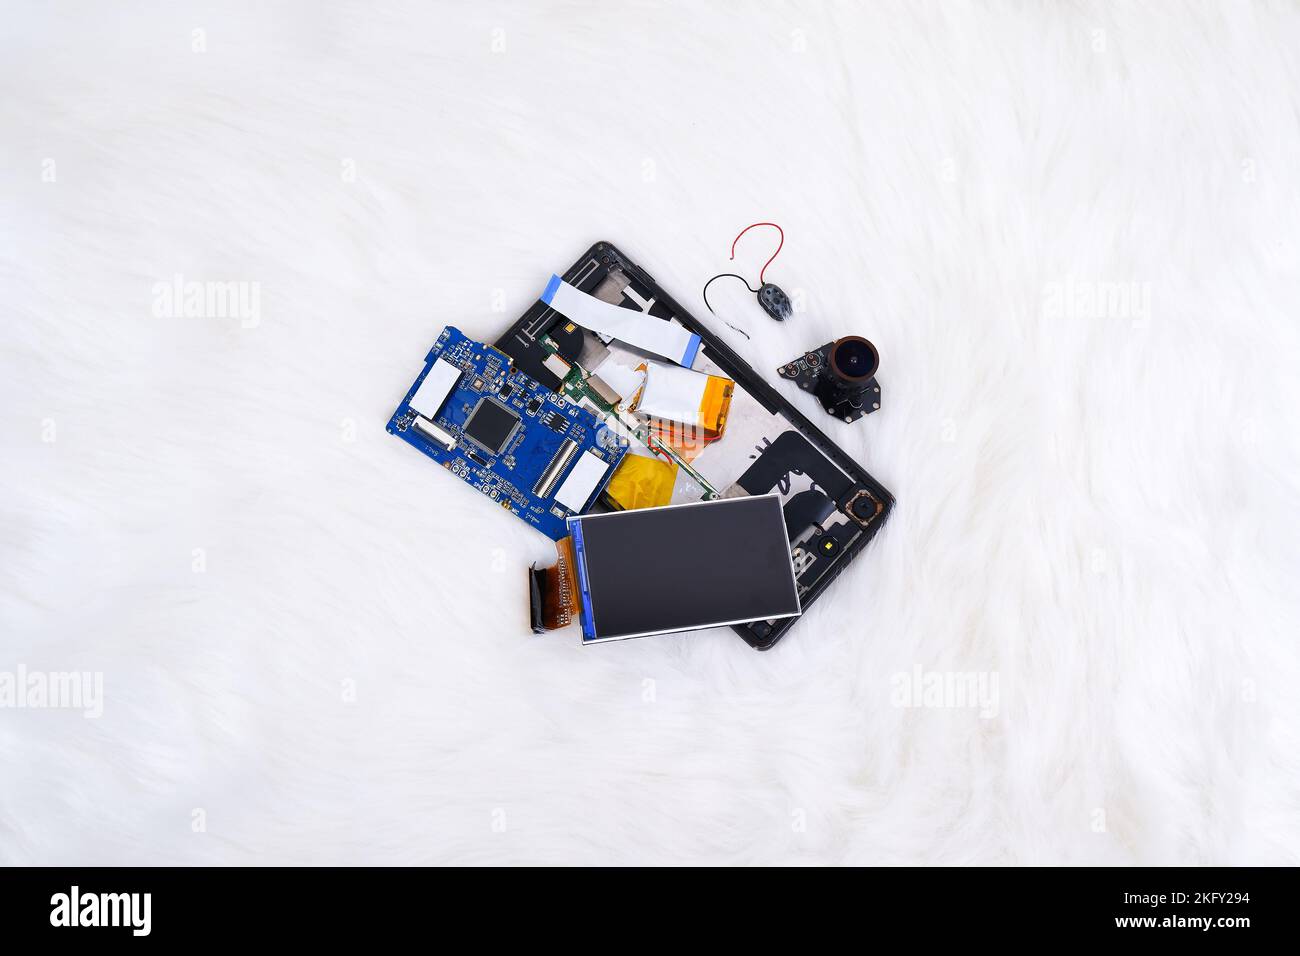 Electronics waste including a lcd screen,a electronic board,a battery,a camera lens and smartphone on white fur rug background Stock Photo